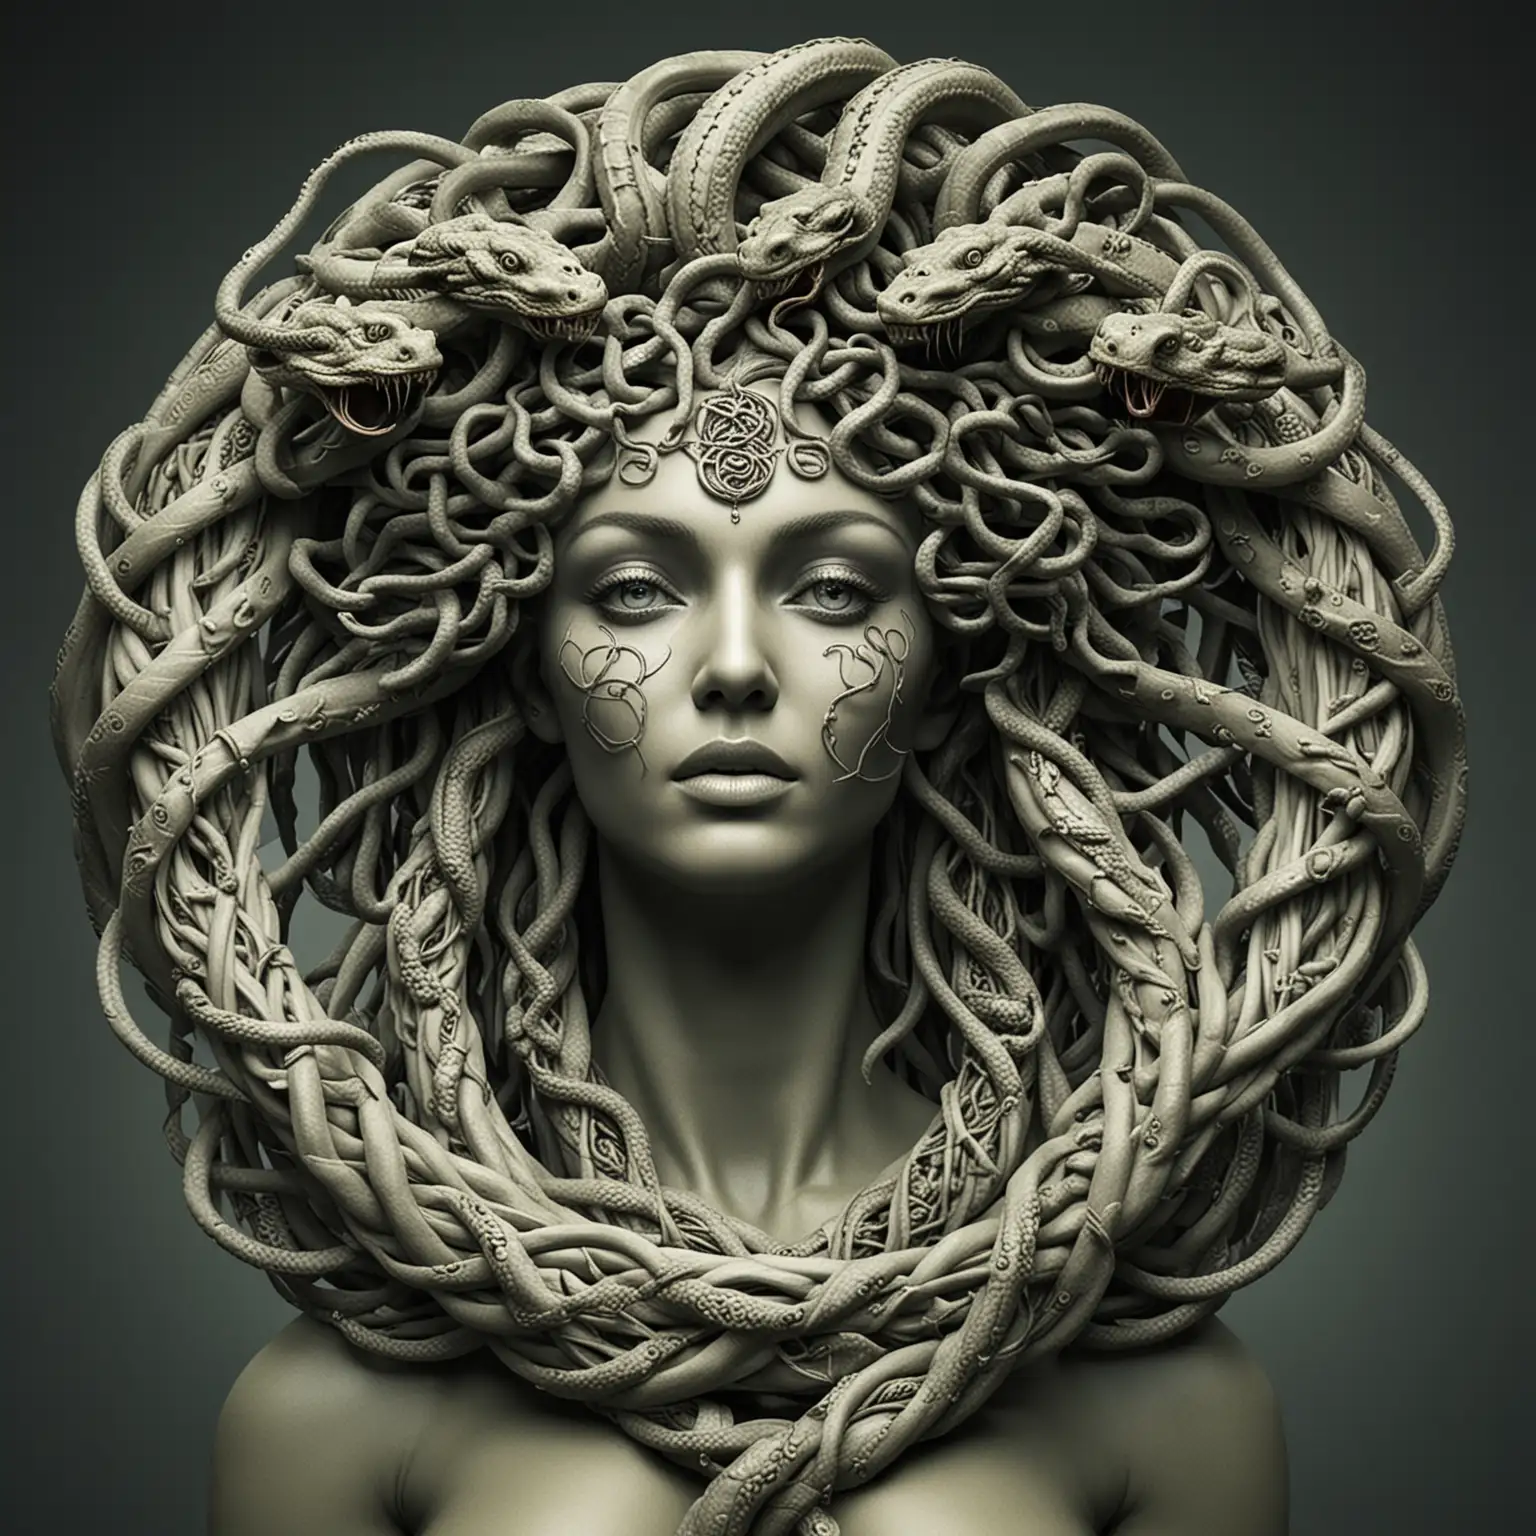 Medusa with snakes turning into DNA double helix